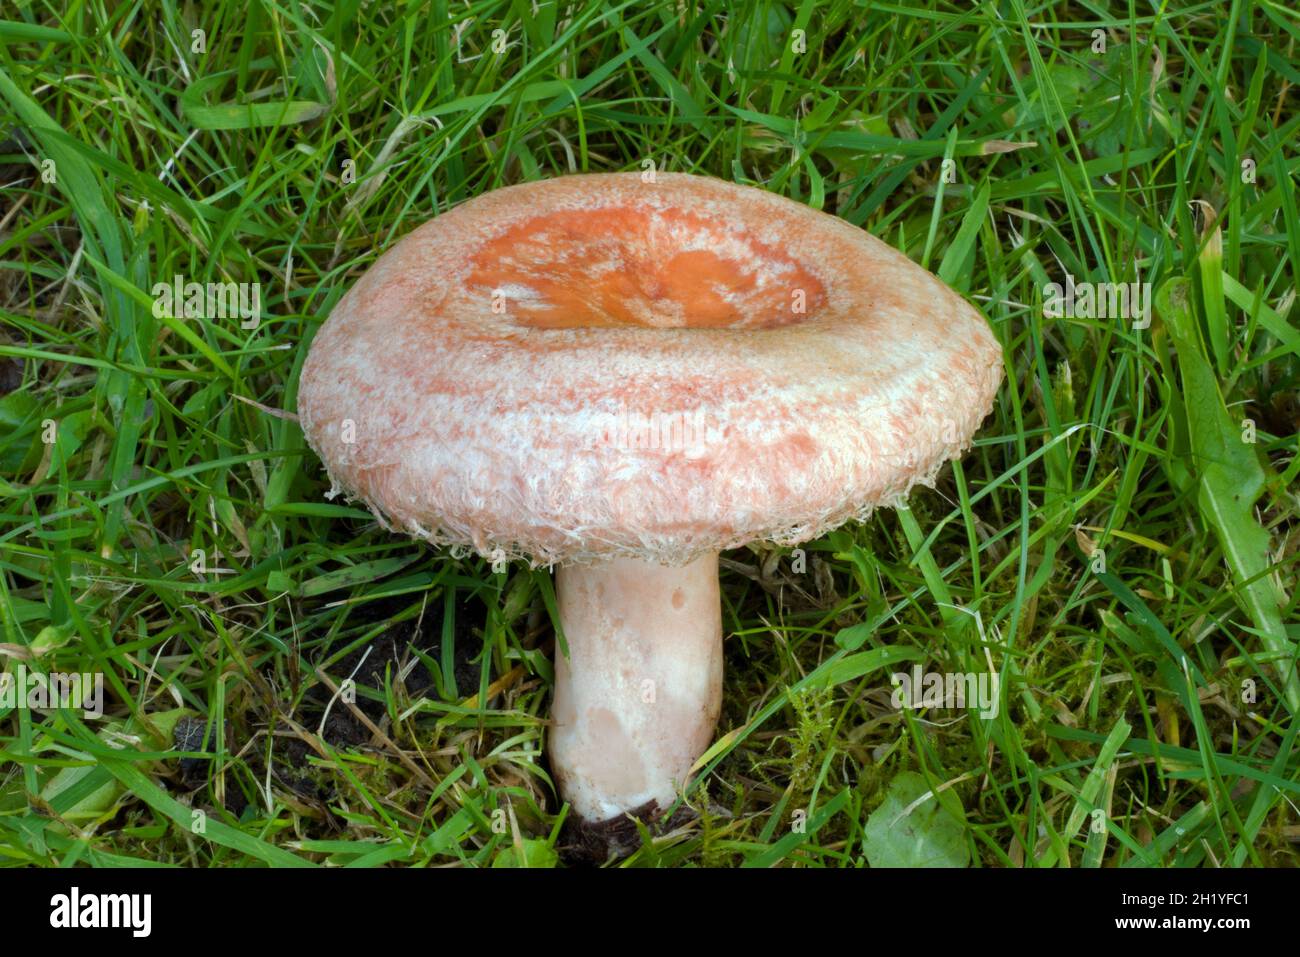 Lactarius torminosus (woolly milkcap) is associated with various trees, especially birch. It occurs in North Africa, Asia, Europe, and North America. Stock Photo